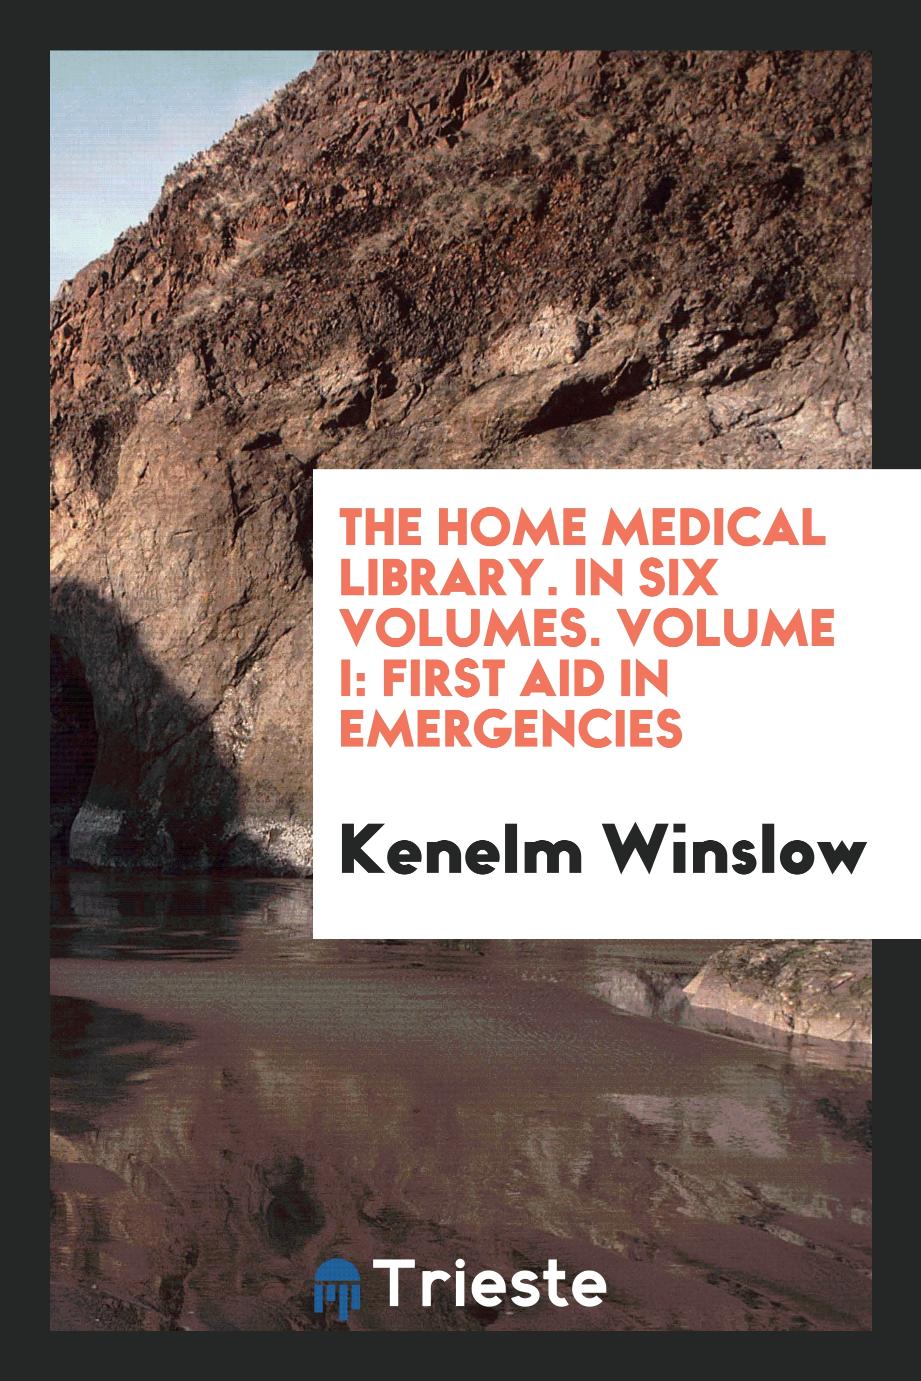 The Home Medical Library. In Six Volumes. Volume I: First Aid in Emergencies